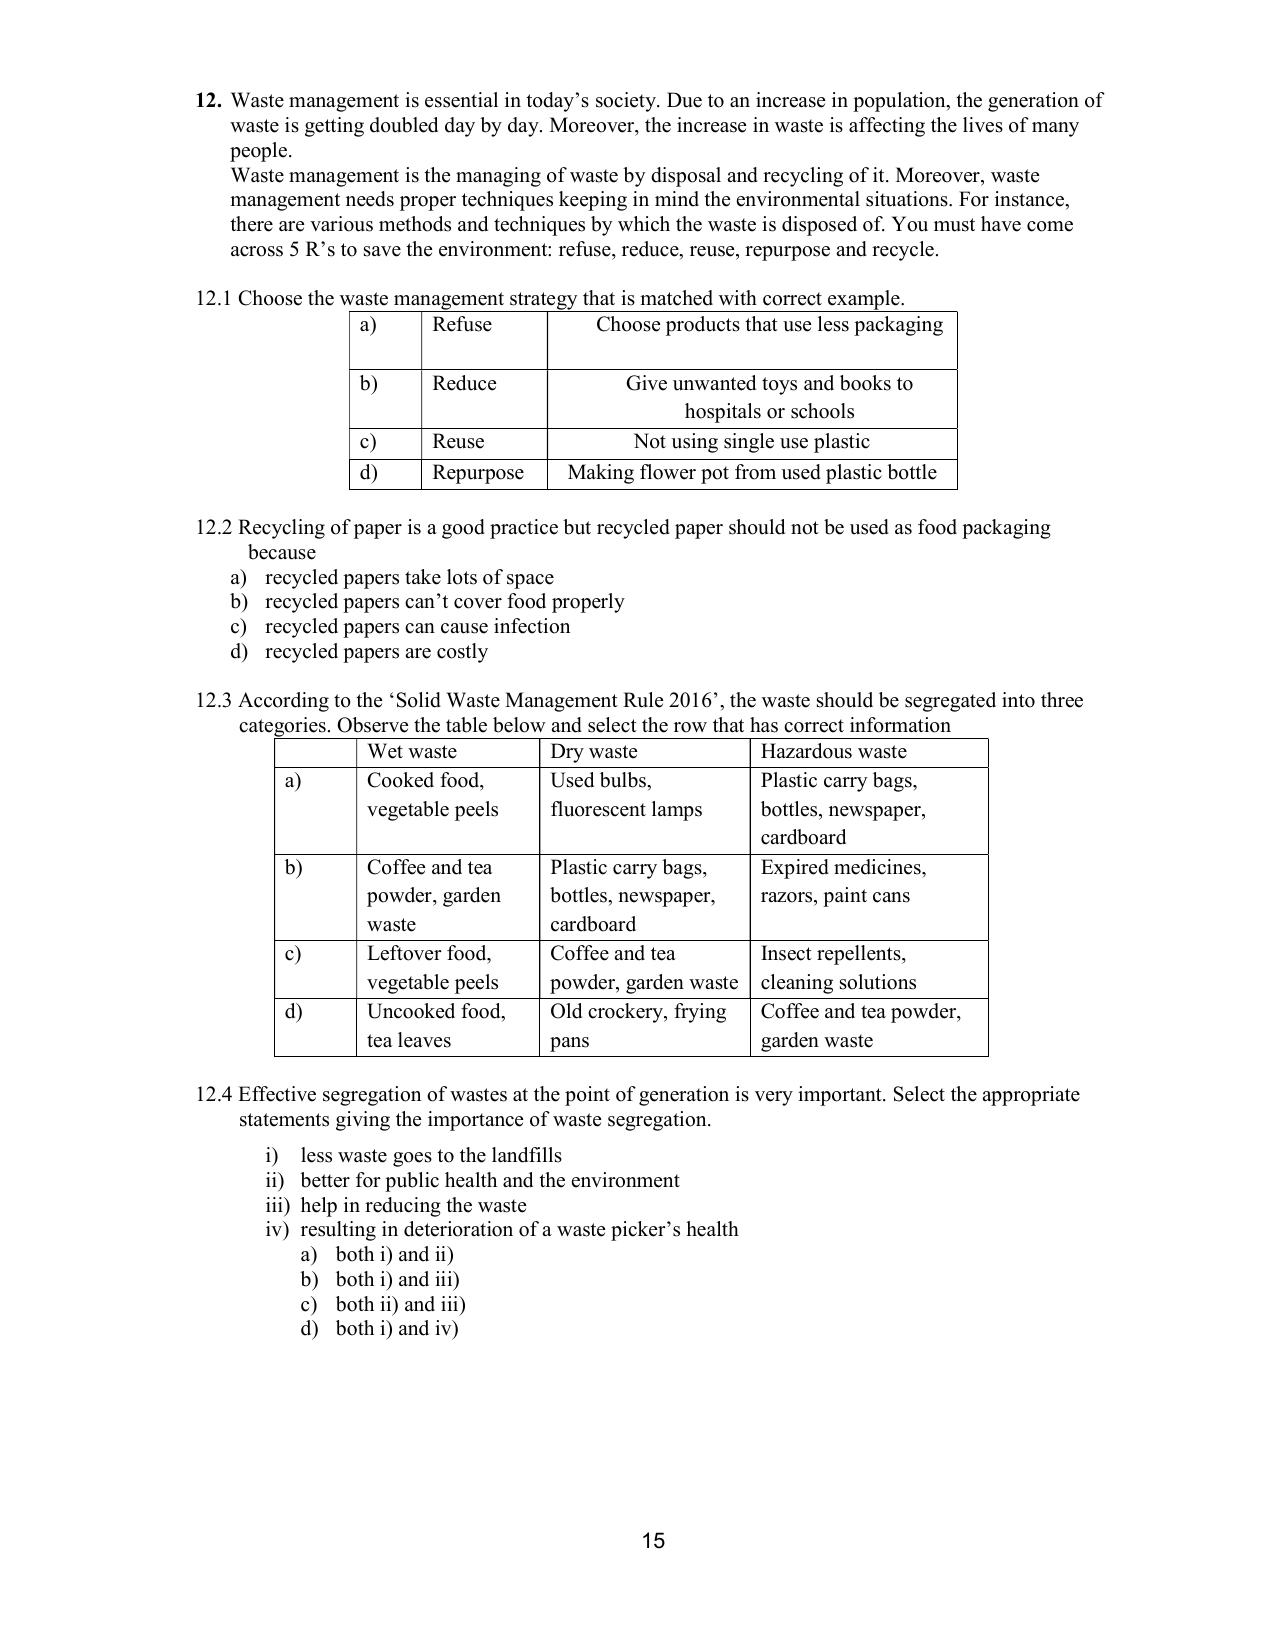 CBSE Class 10 Science Question Bank - Page 15